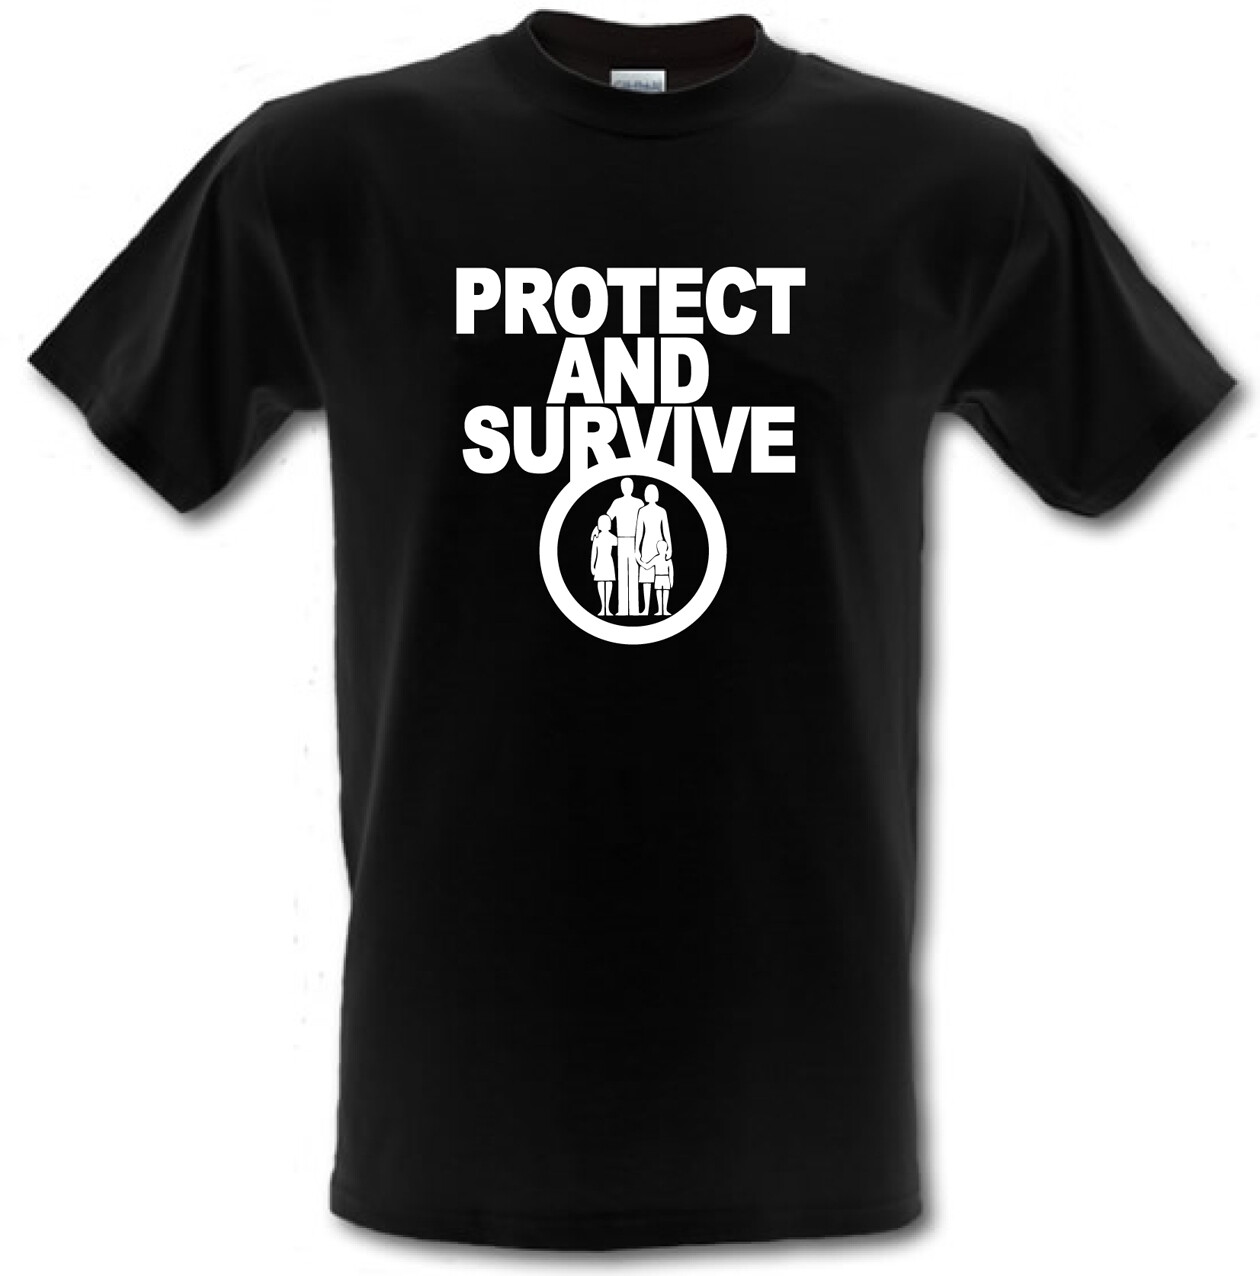 PROTECT AND SURVIVE